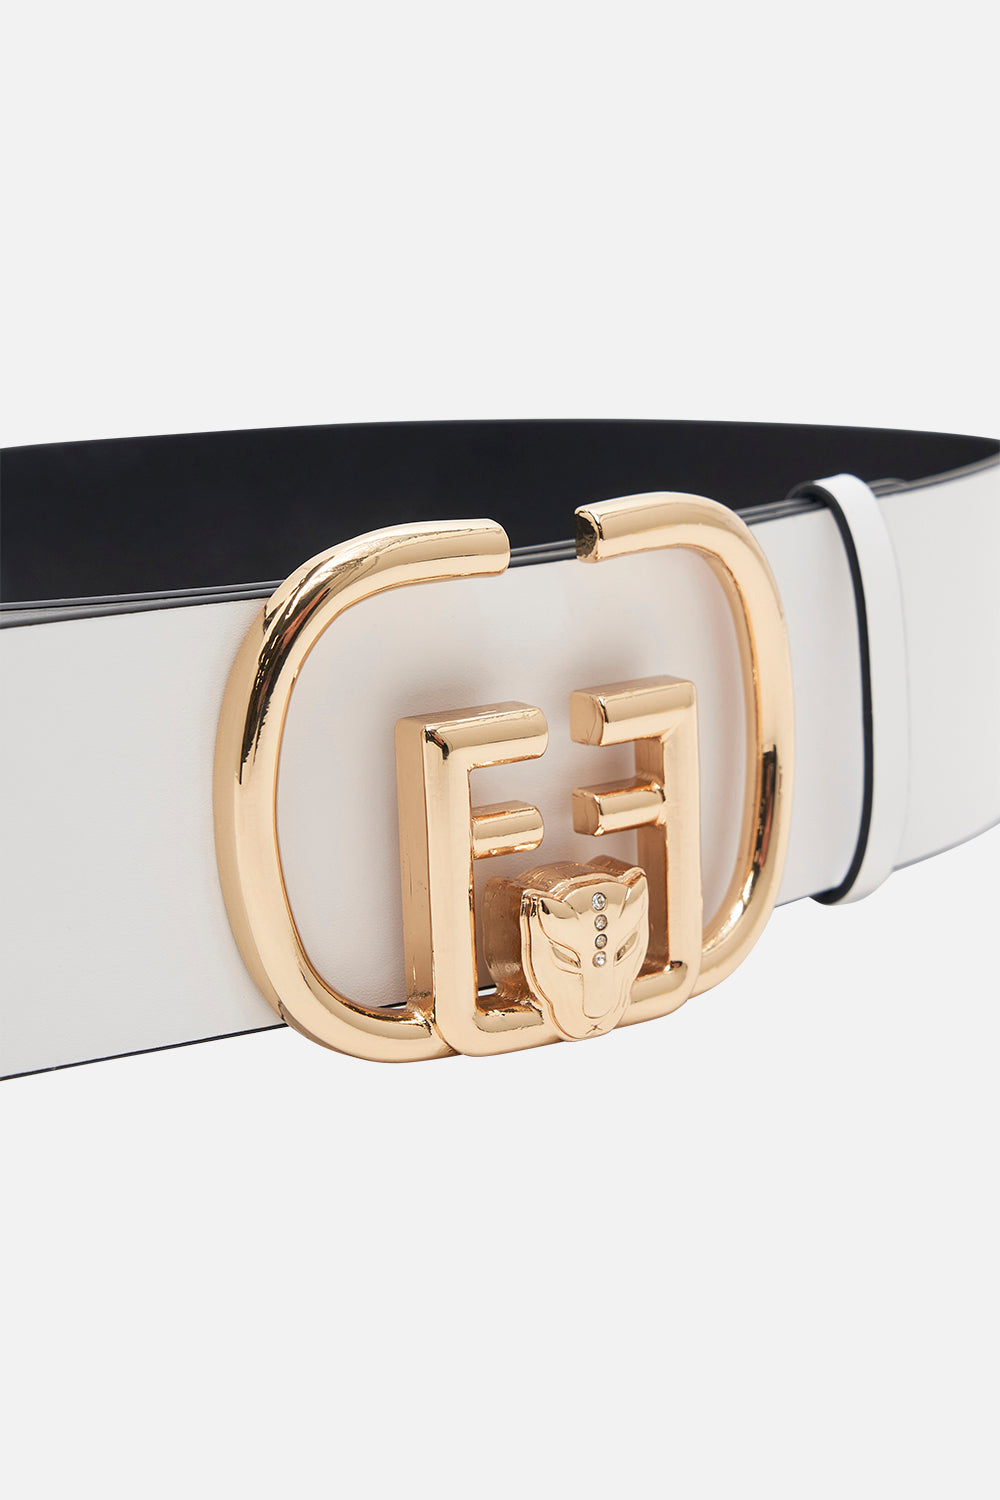 Product view of CAMILLA reversible leather belt 